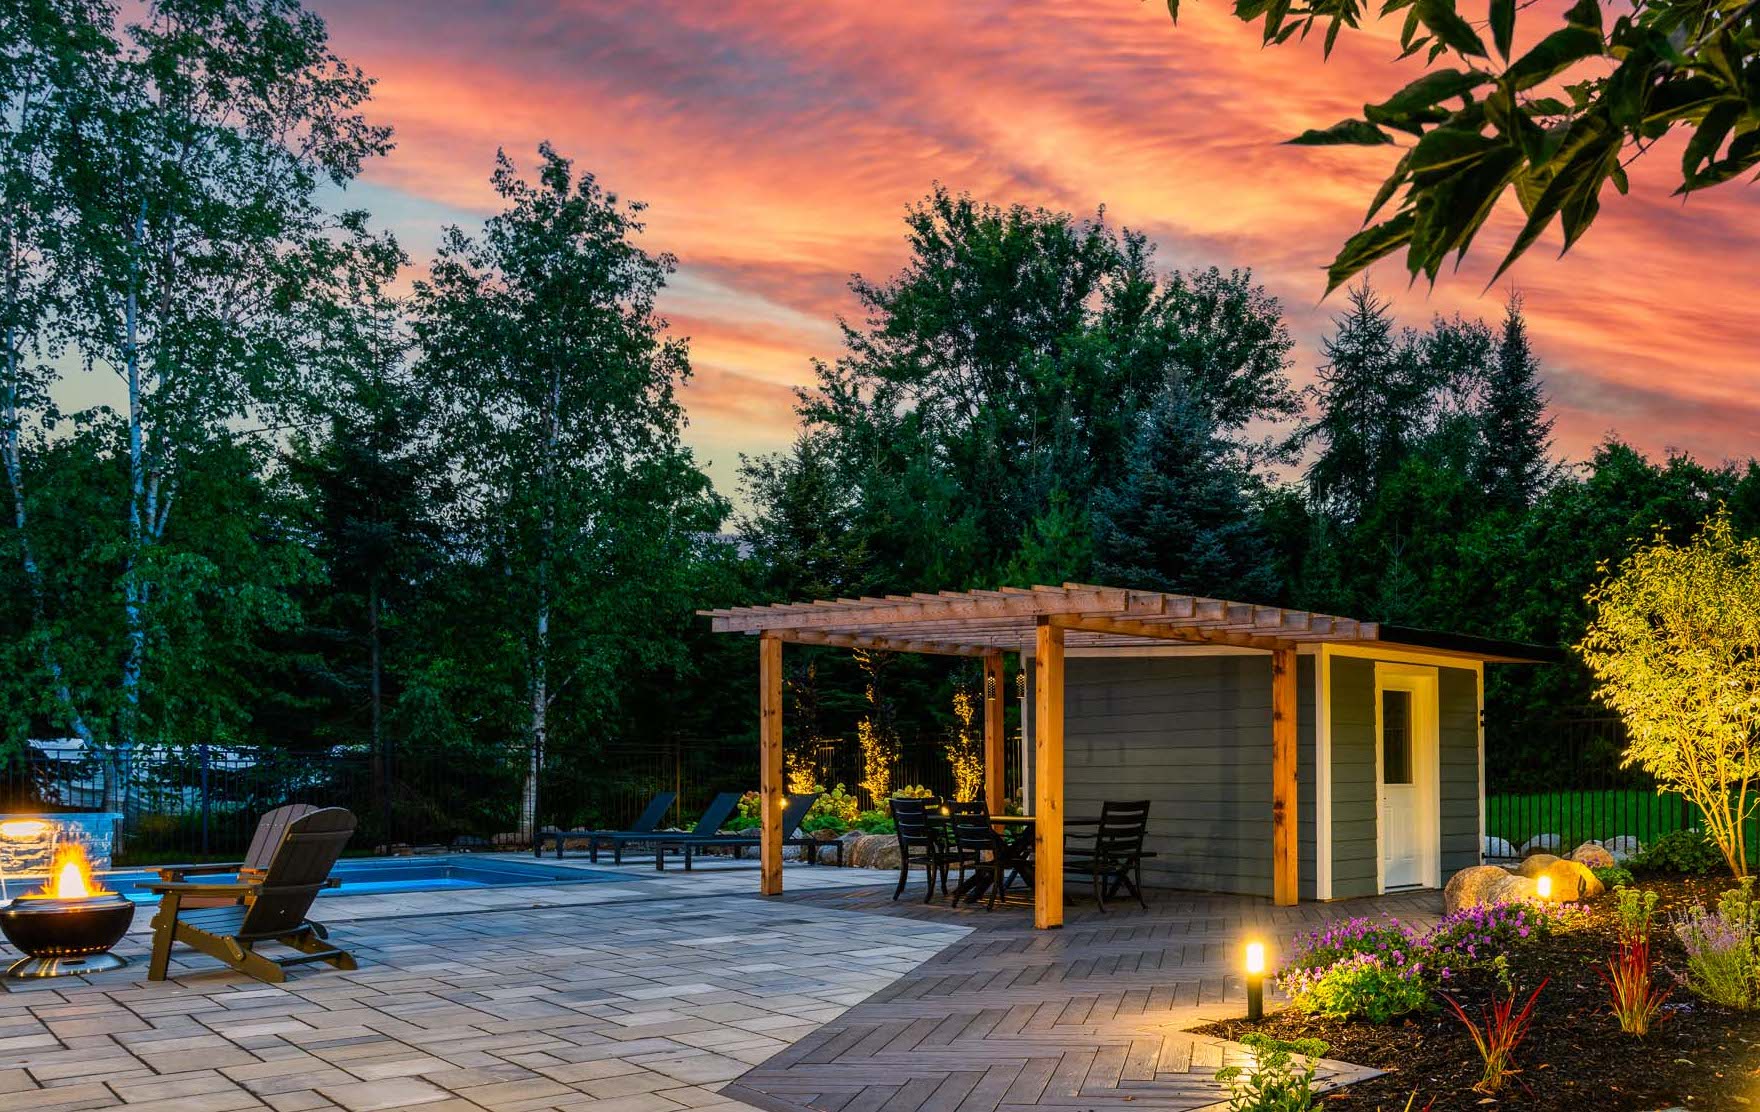 A serene backyard at dusk featuring a pergola, outdoor furniture, a fire pit, vibrant garden, and a captivating cotton-candy sky.